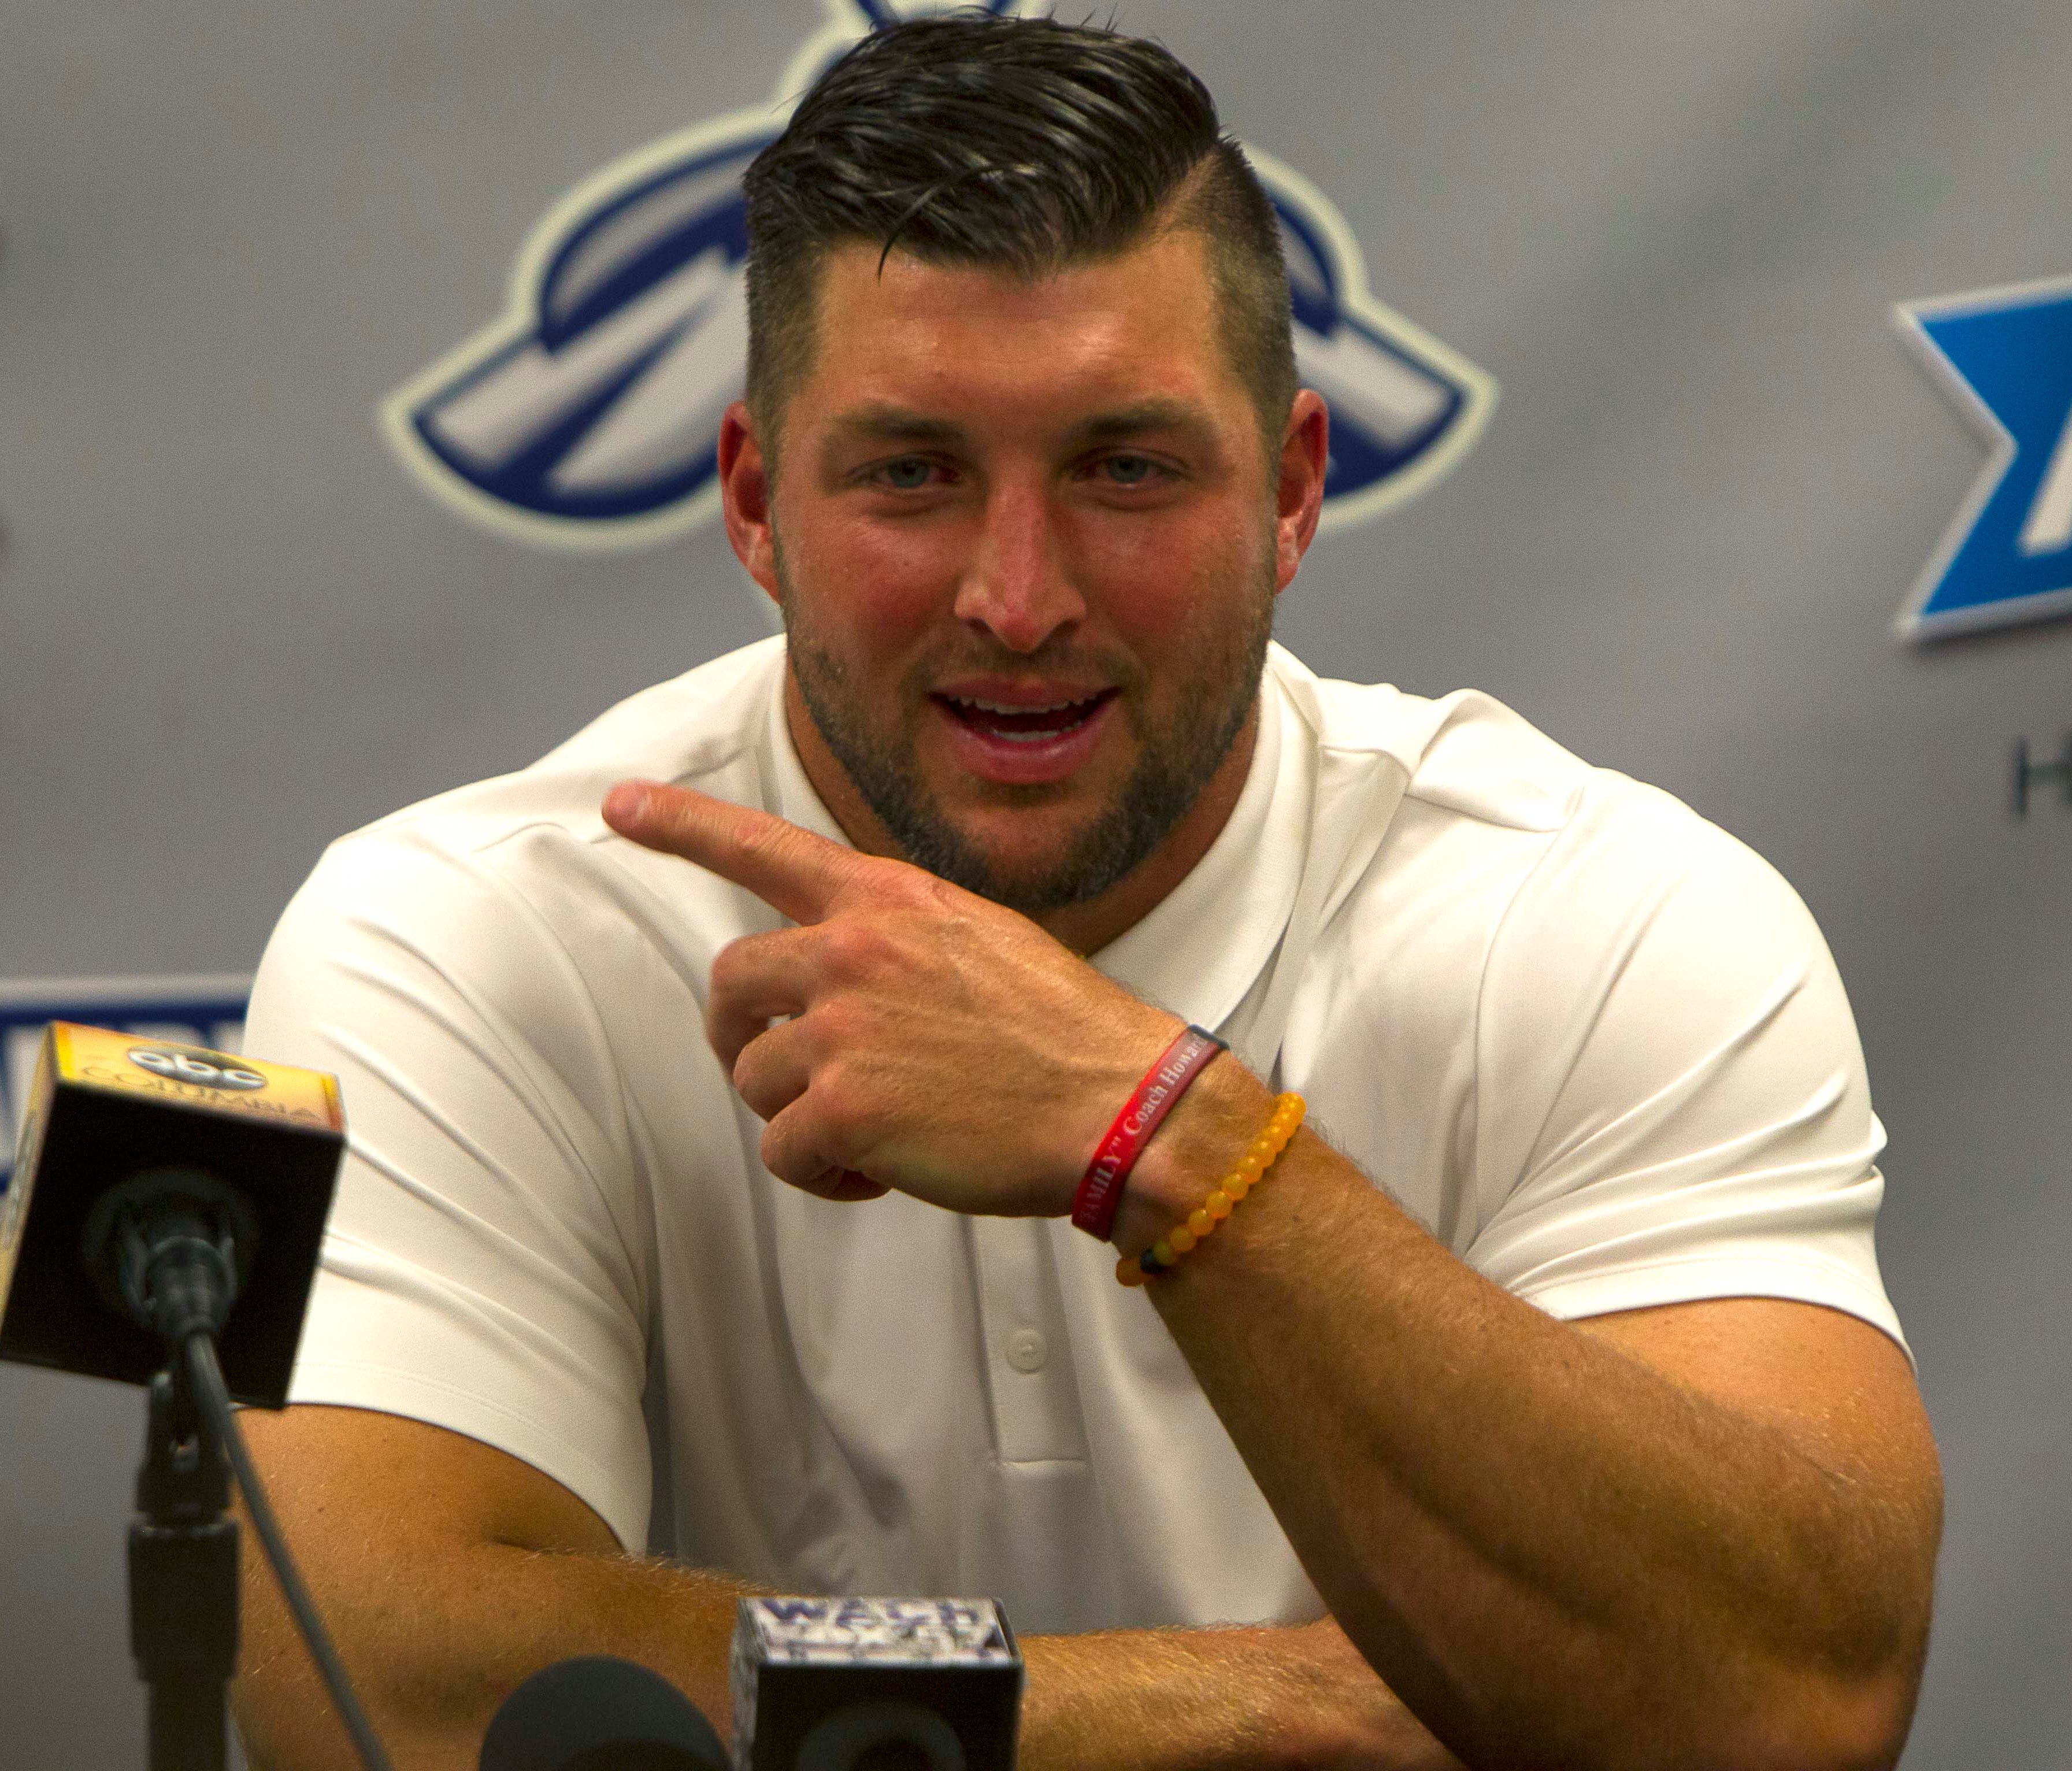 Tim Tebow answers questions during a press conference after the game.